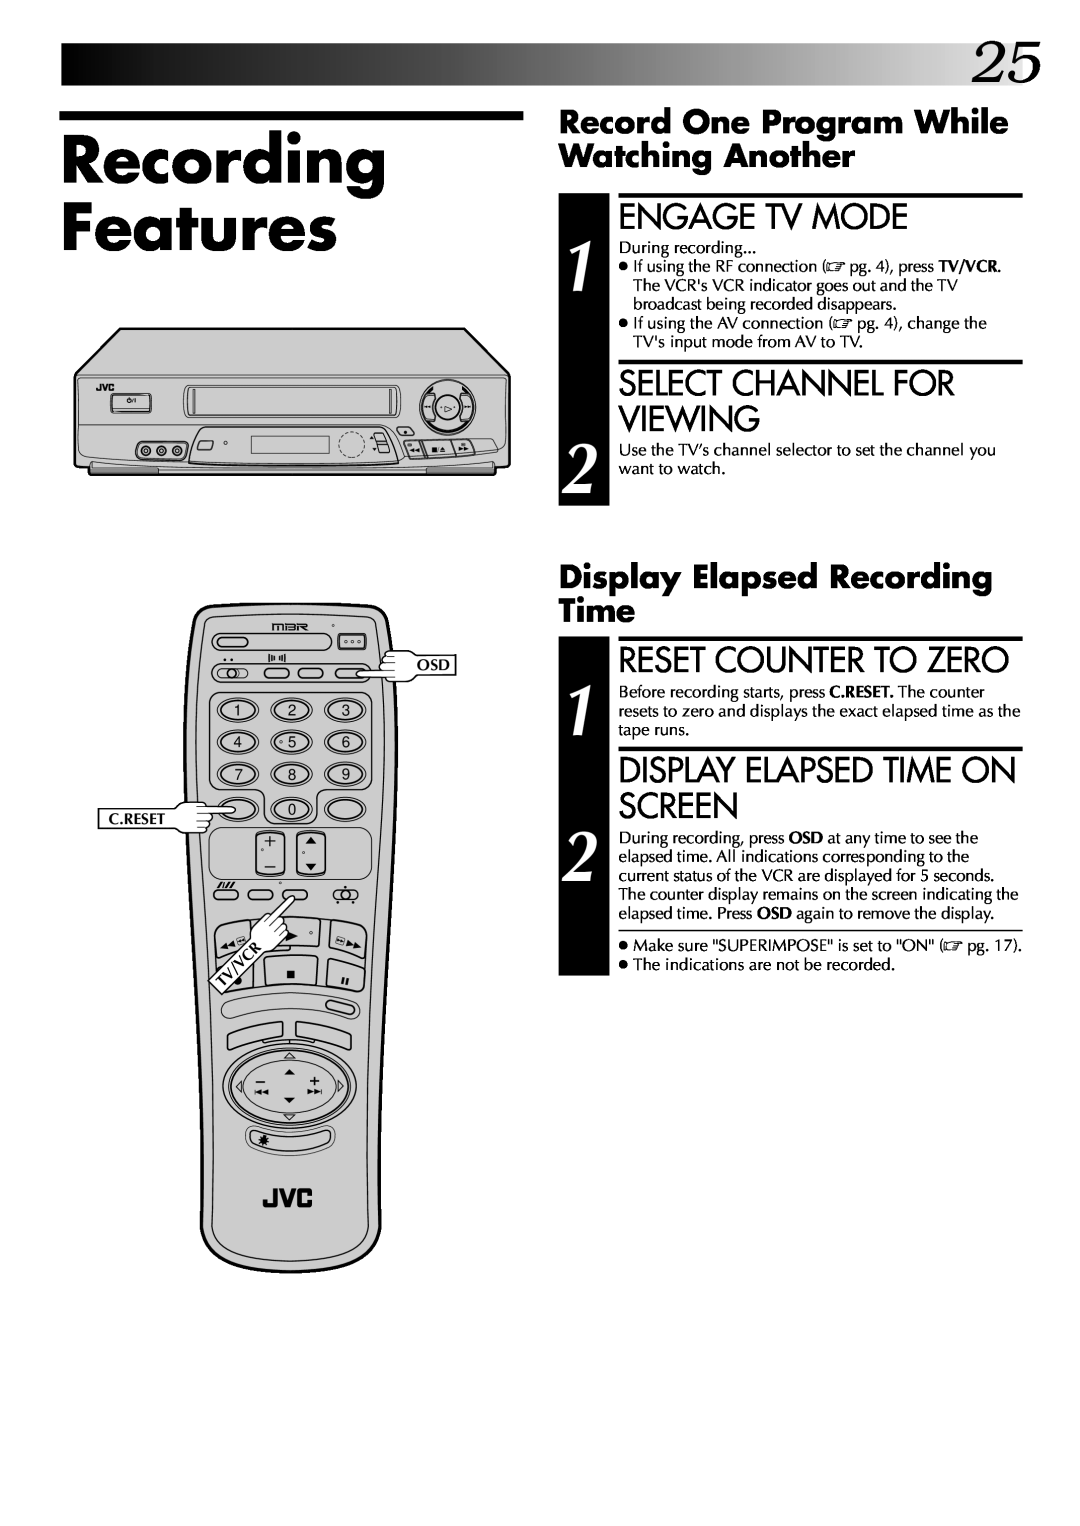 JVC HR-J7004UM manual Recording Features, Engage Tv Mode, Select Channel For Viewing, Reset Counter To Zero 